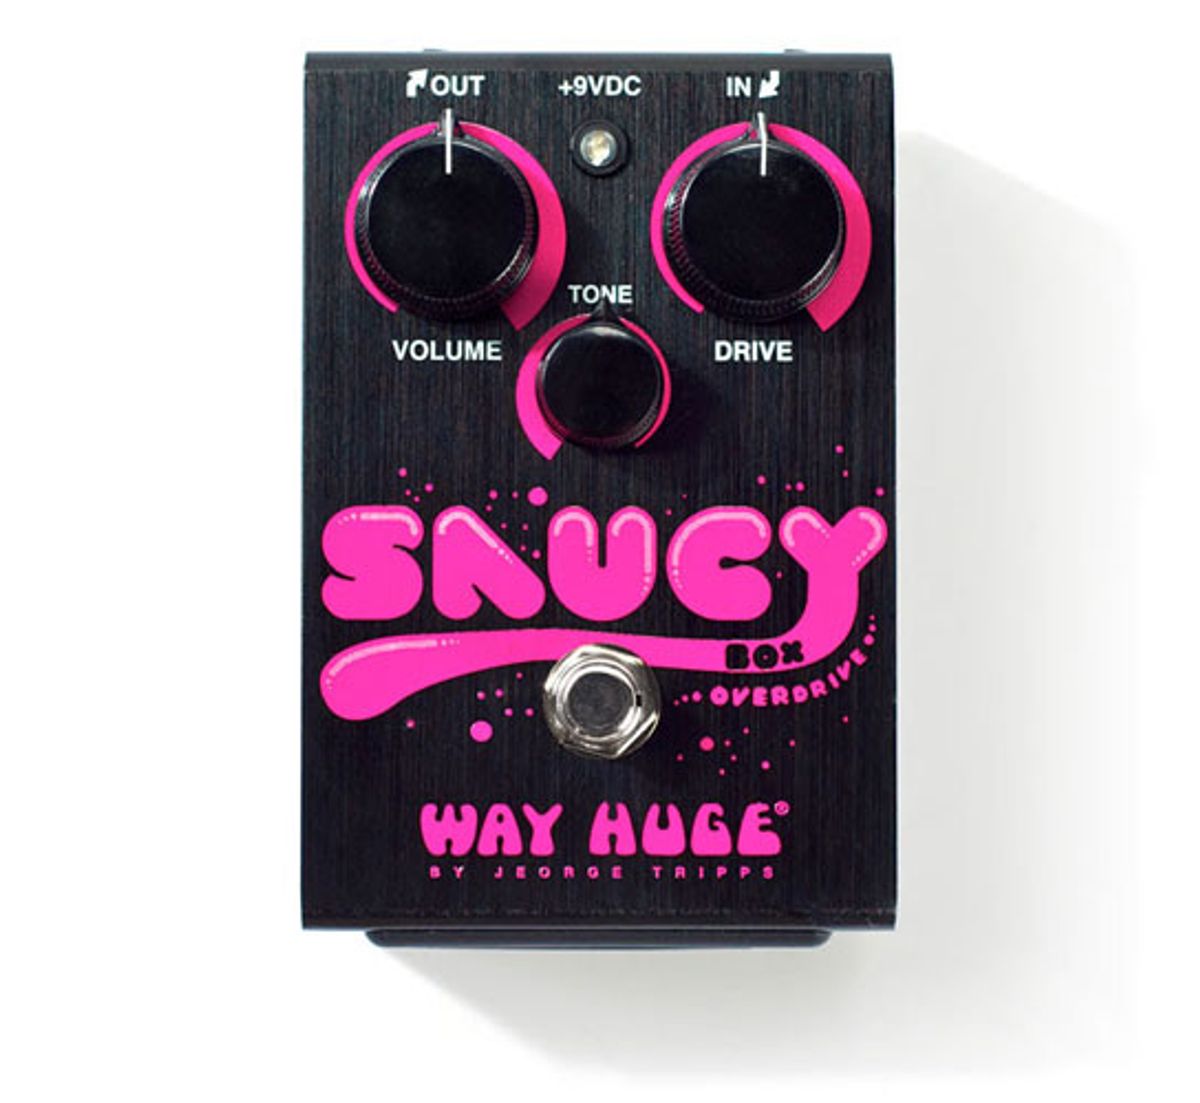 Way Huge Releases the Saucy Box